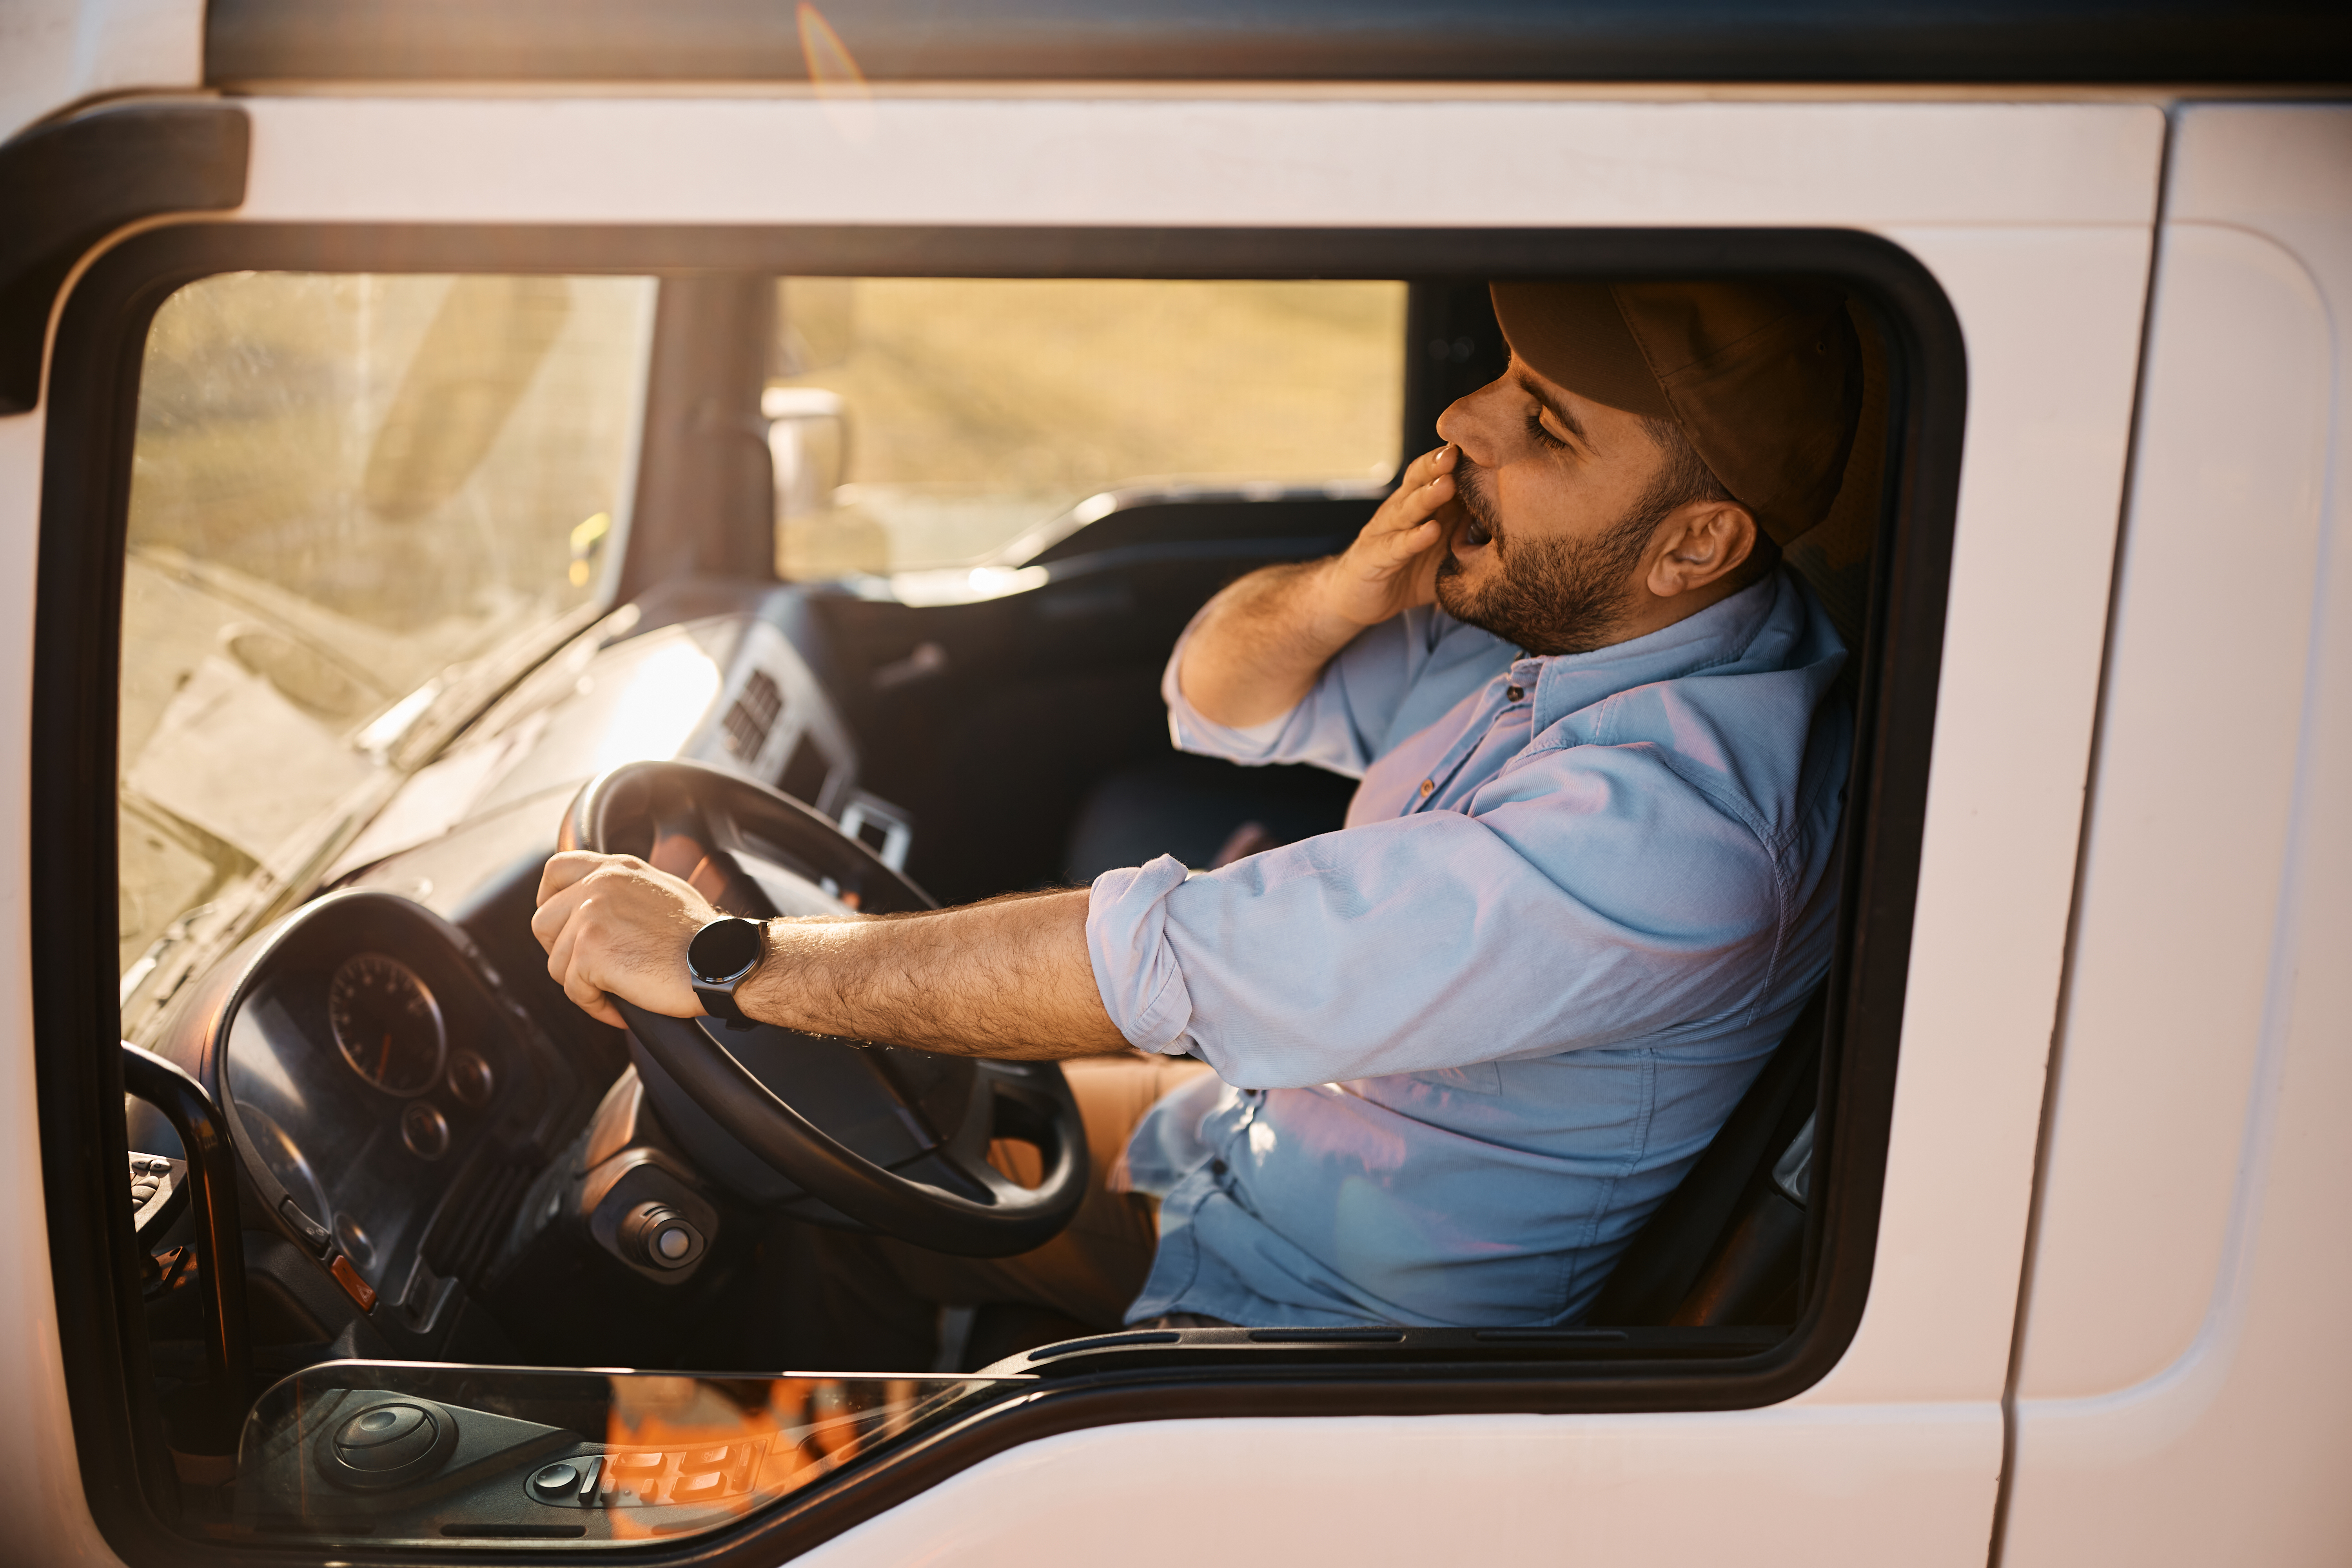 Driver fatigue is among the most common causes of truck accidents in the Chicago area and other parts of Illinois.